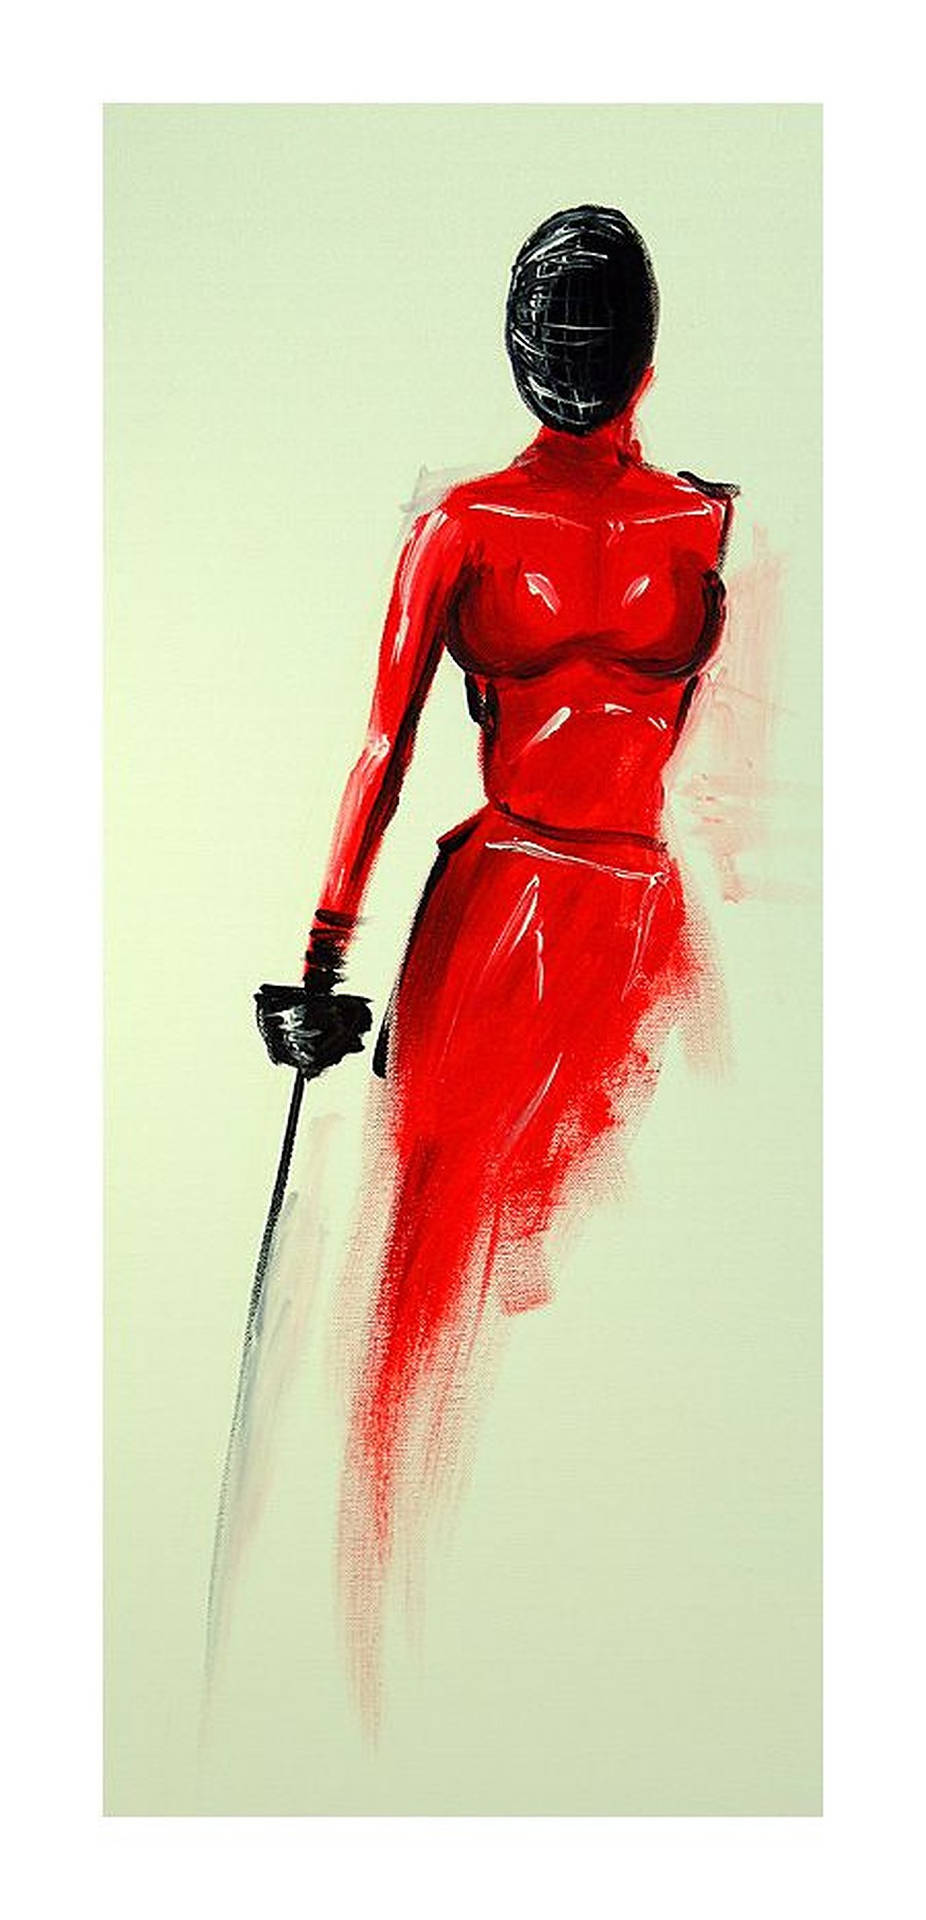 Fencing Kendo red painting wallpaper 